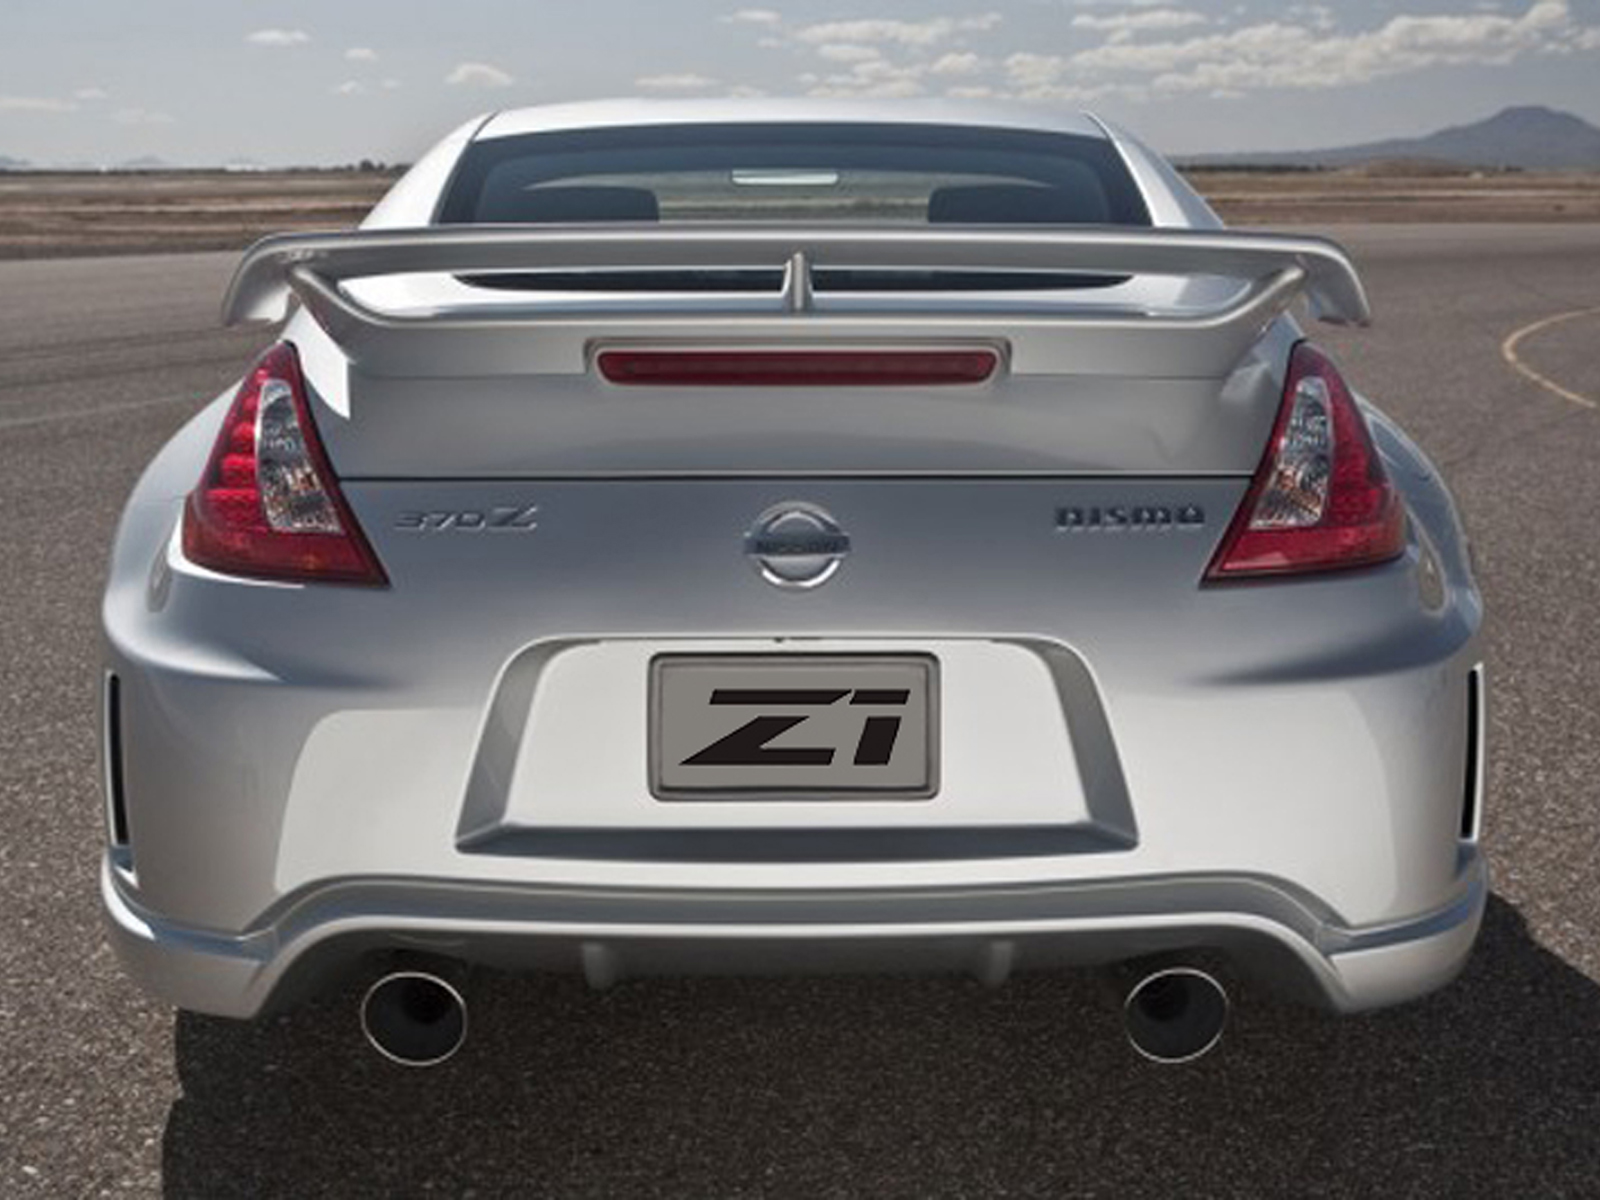 NISMO '09-'13 370Z Rear Fascia/Bumper - Z1 Motorsports - Performance OEM  and Aftermarket Engineered Parts Global Leader In 300ZX 350Z 370Z G35 G37  Q50 Q60